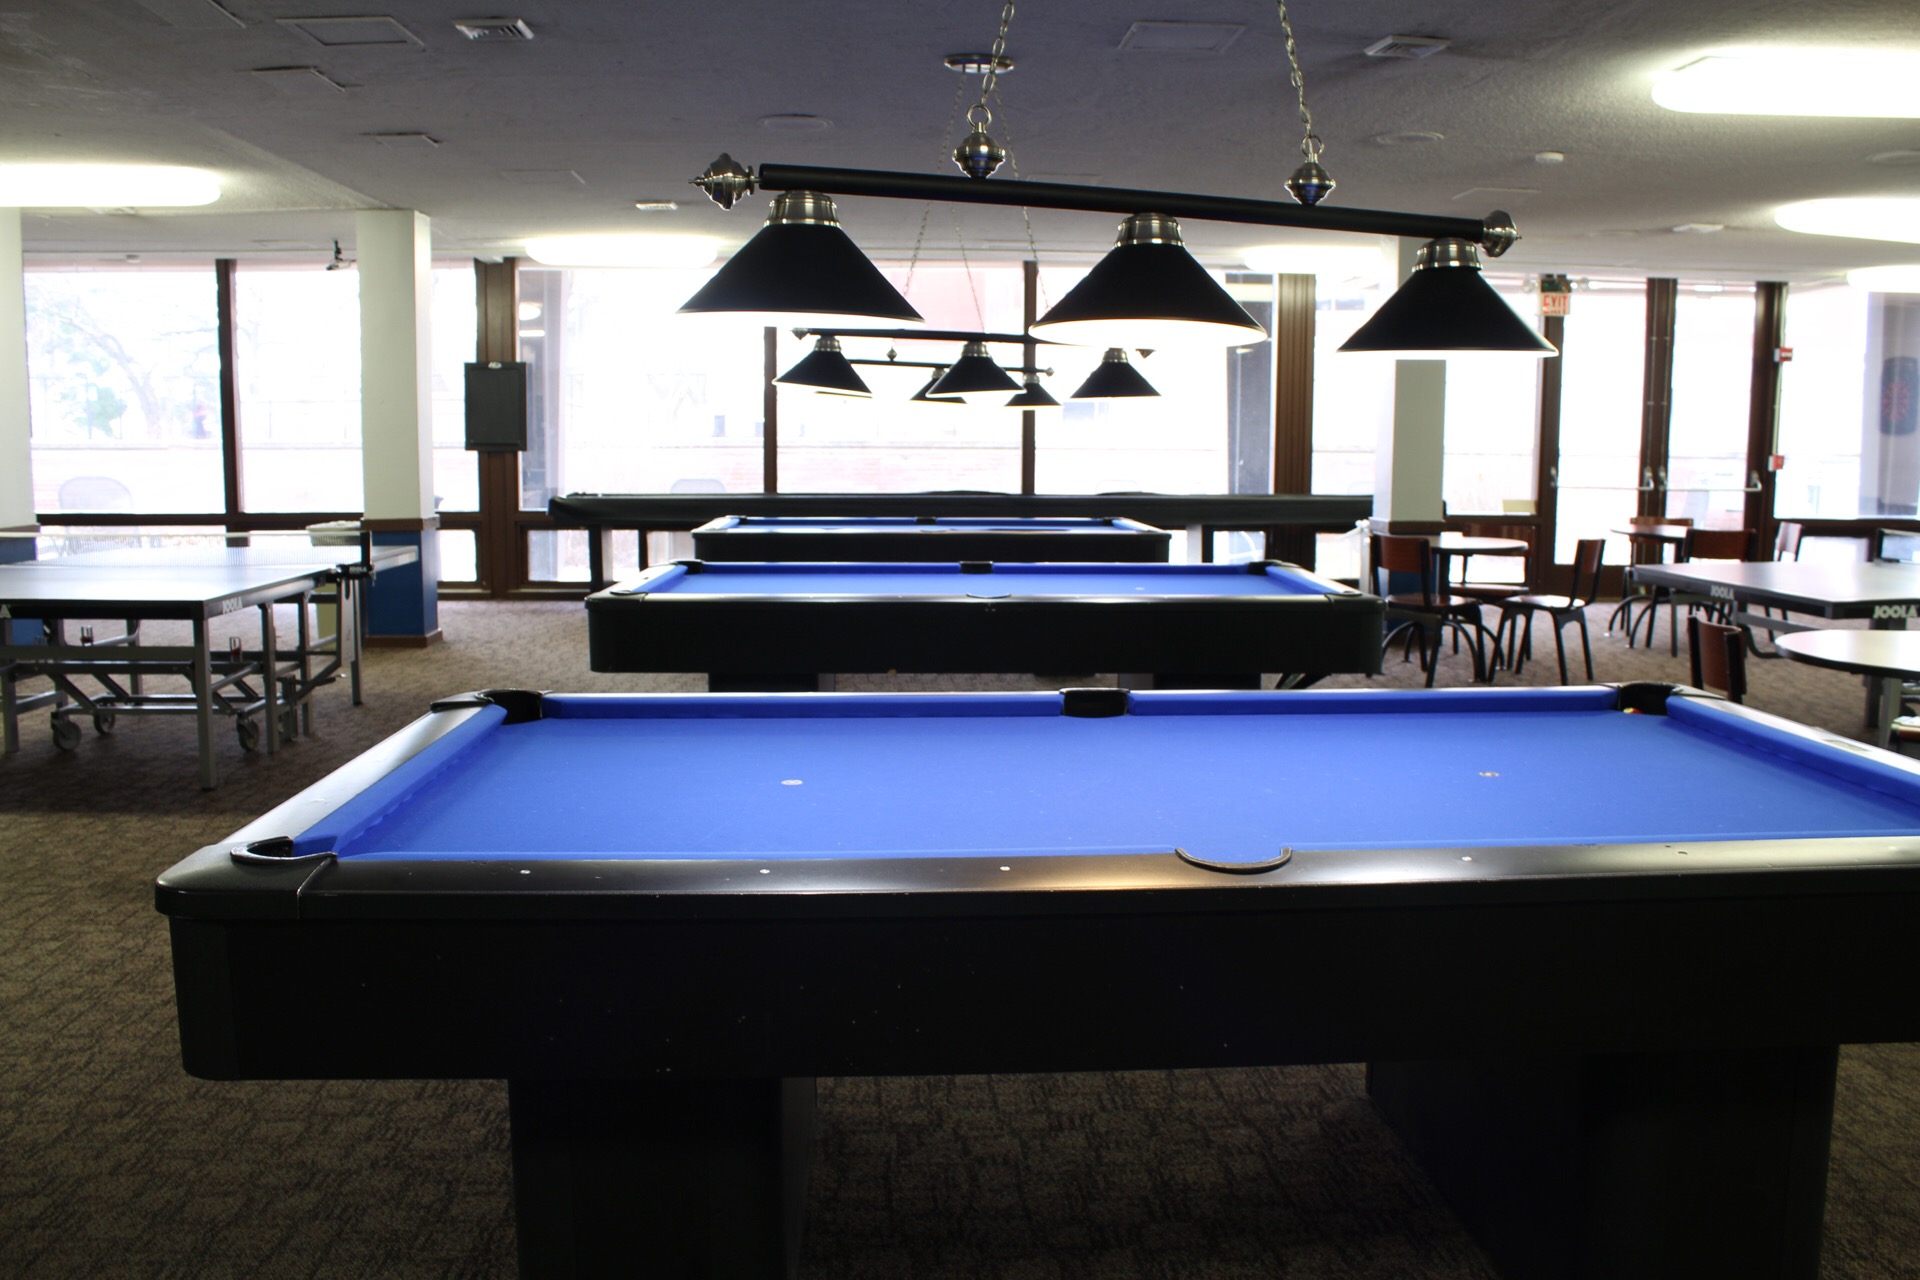 Game Room showing 3 pool tables with overhead lighting.